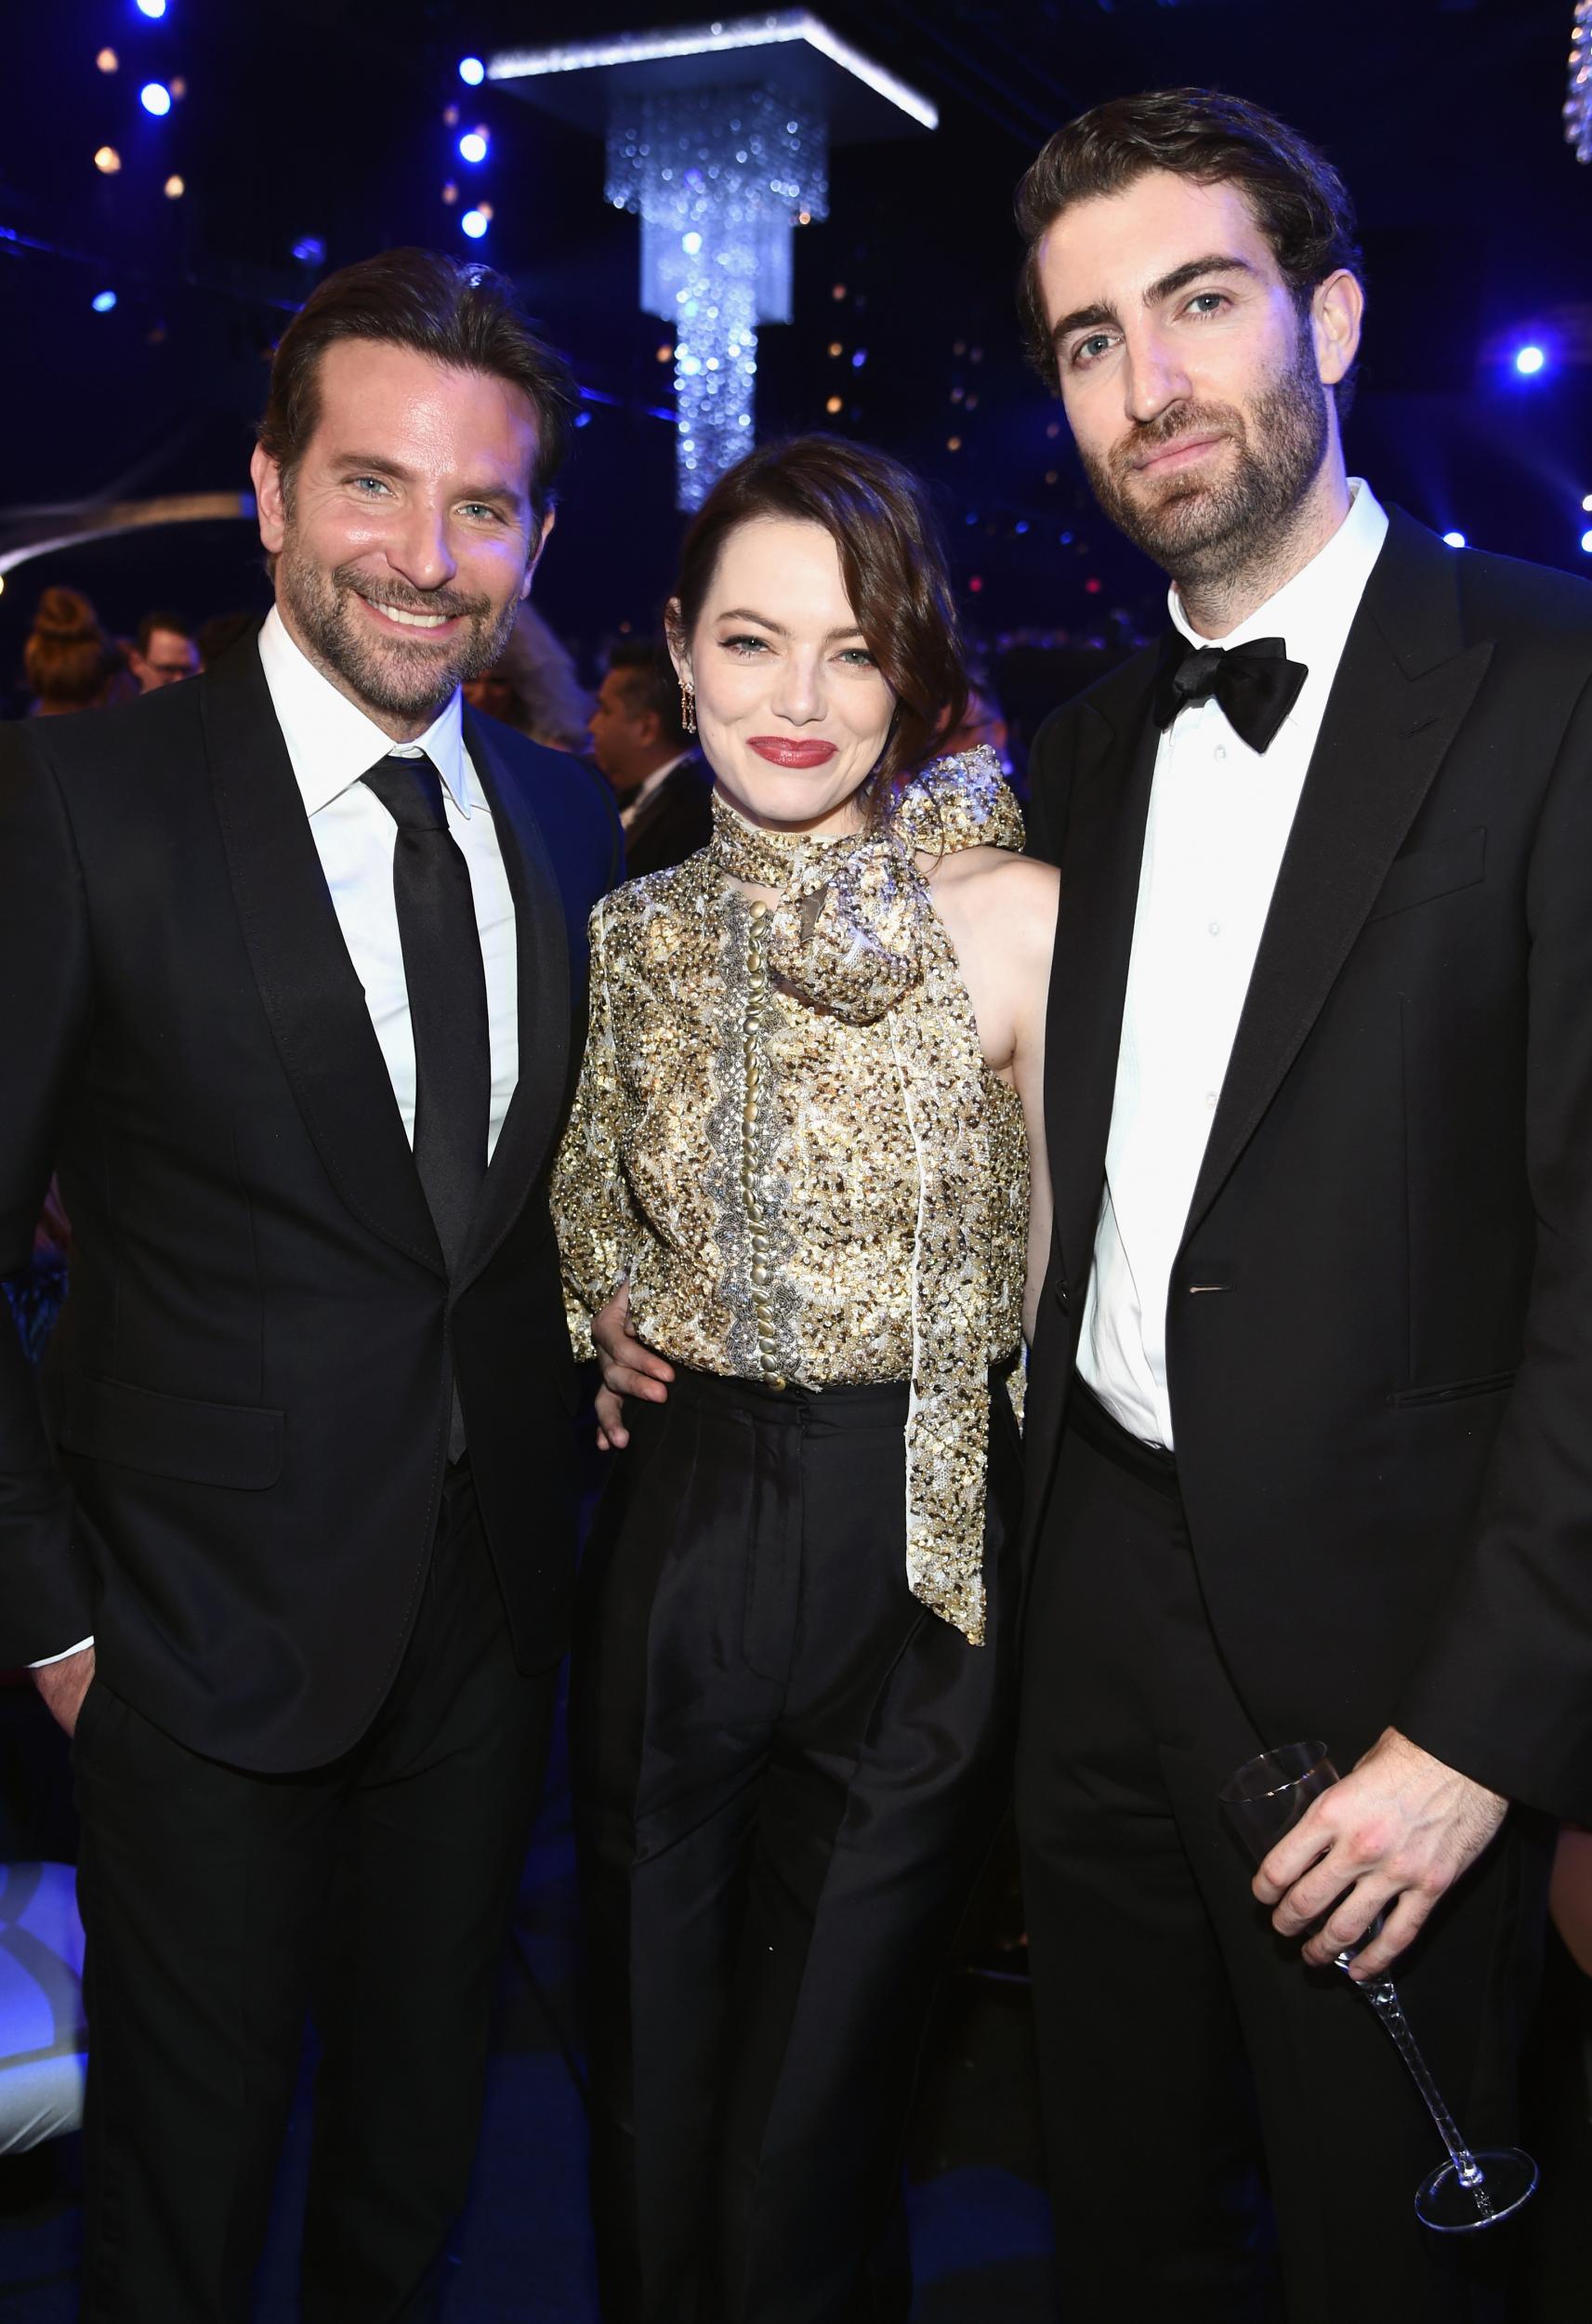 Bradley Cooper, Emma Stone and Dave McCary at the Screen Actors Guild Awards, 27 January 2019